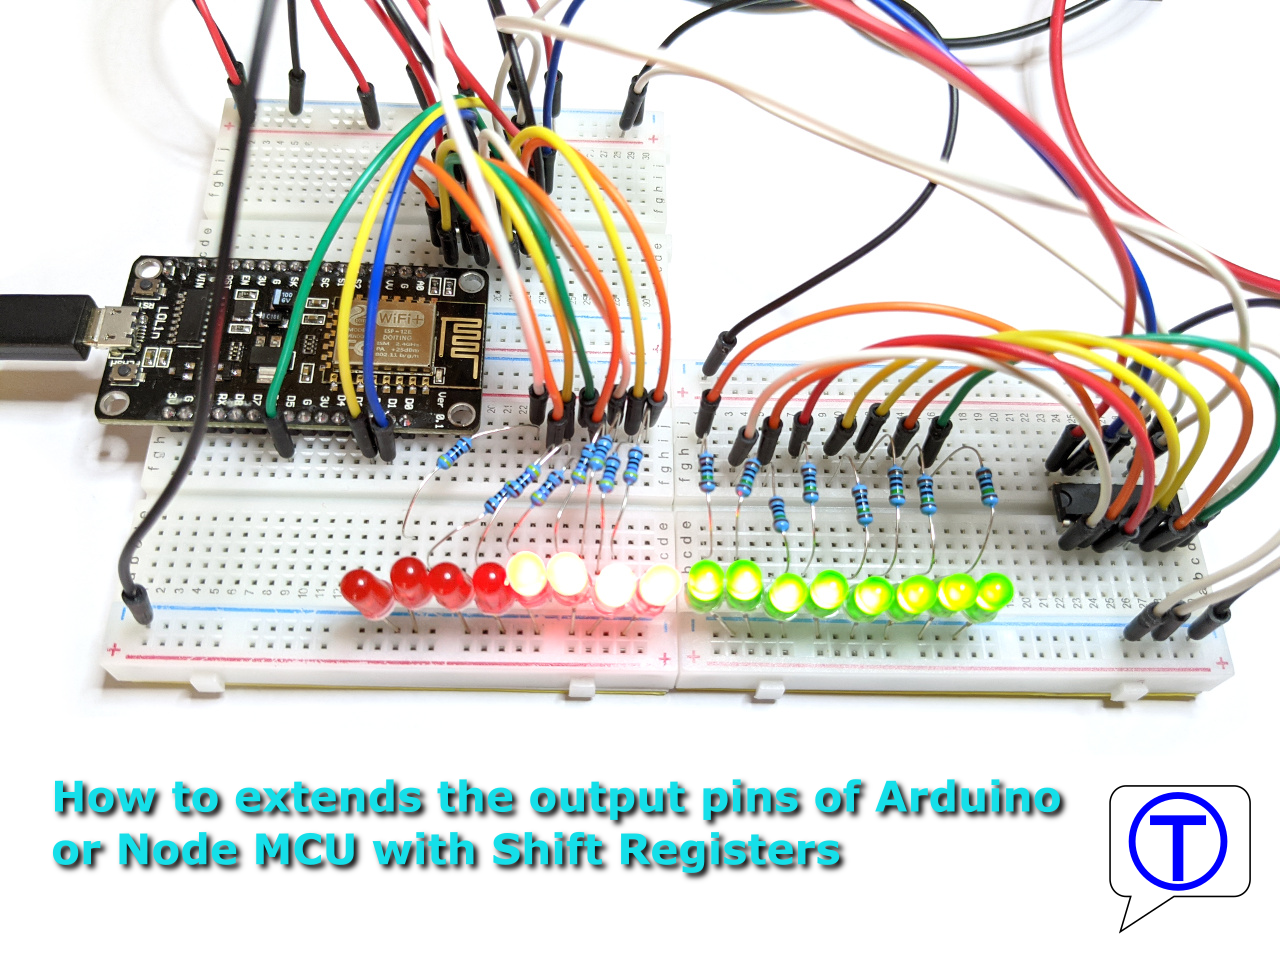 How to extend the number of digital pins of an Arduino or NodeMCU using shift registers